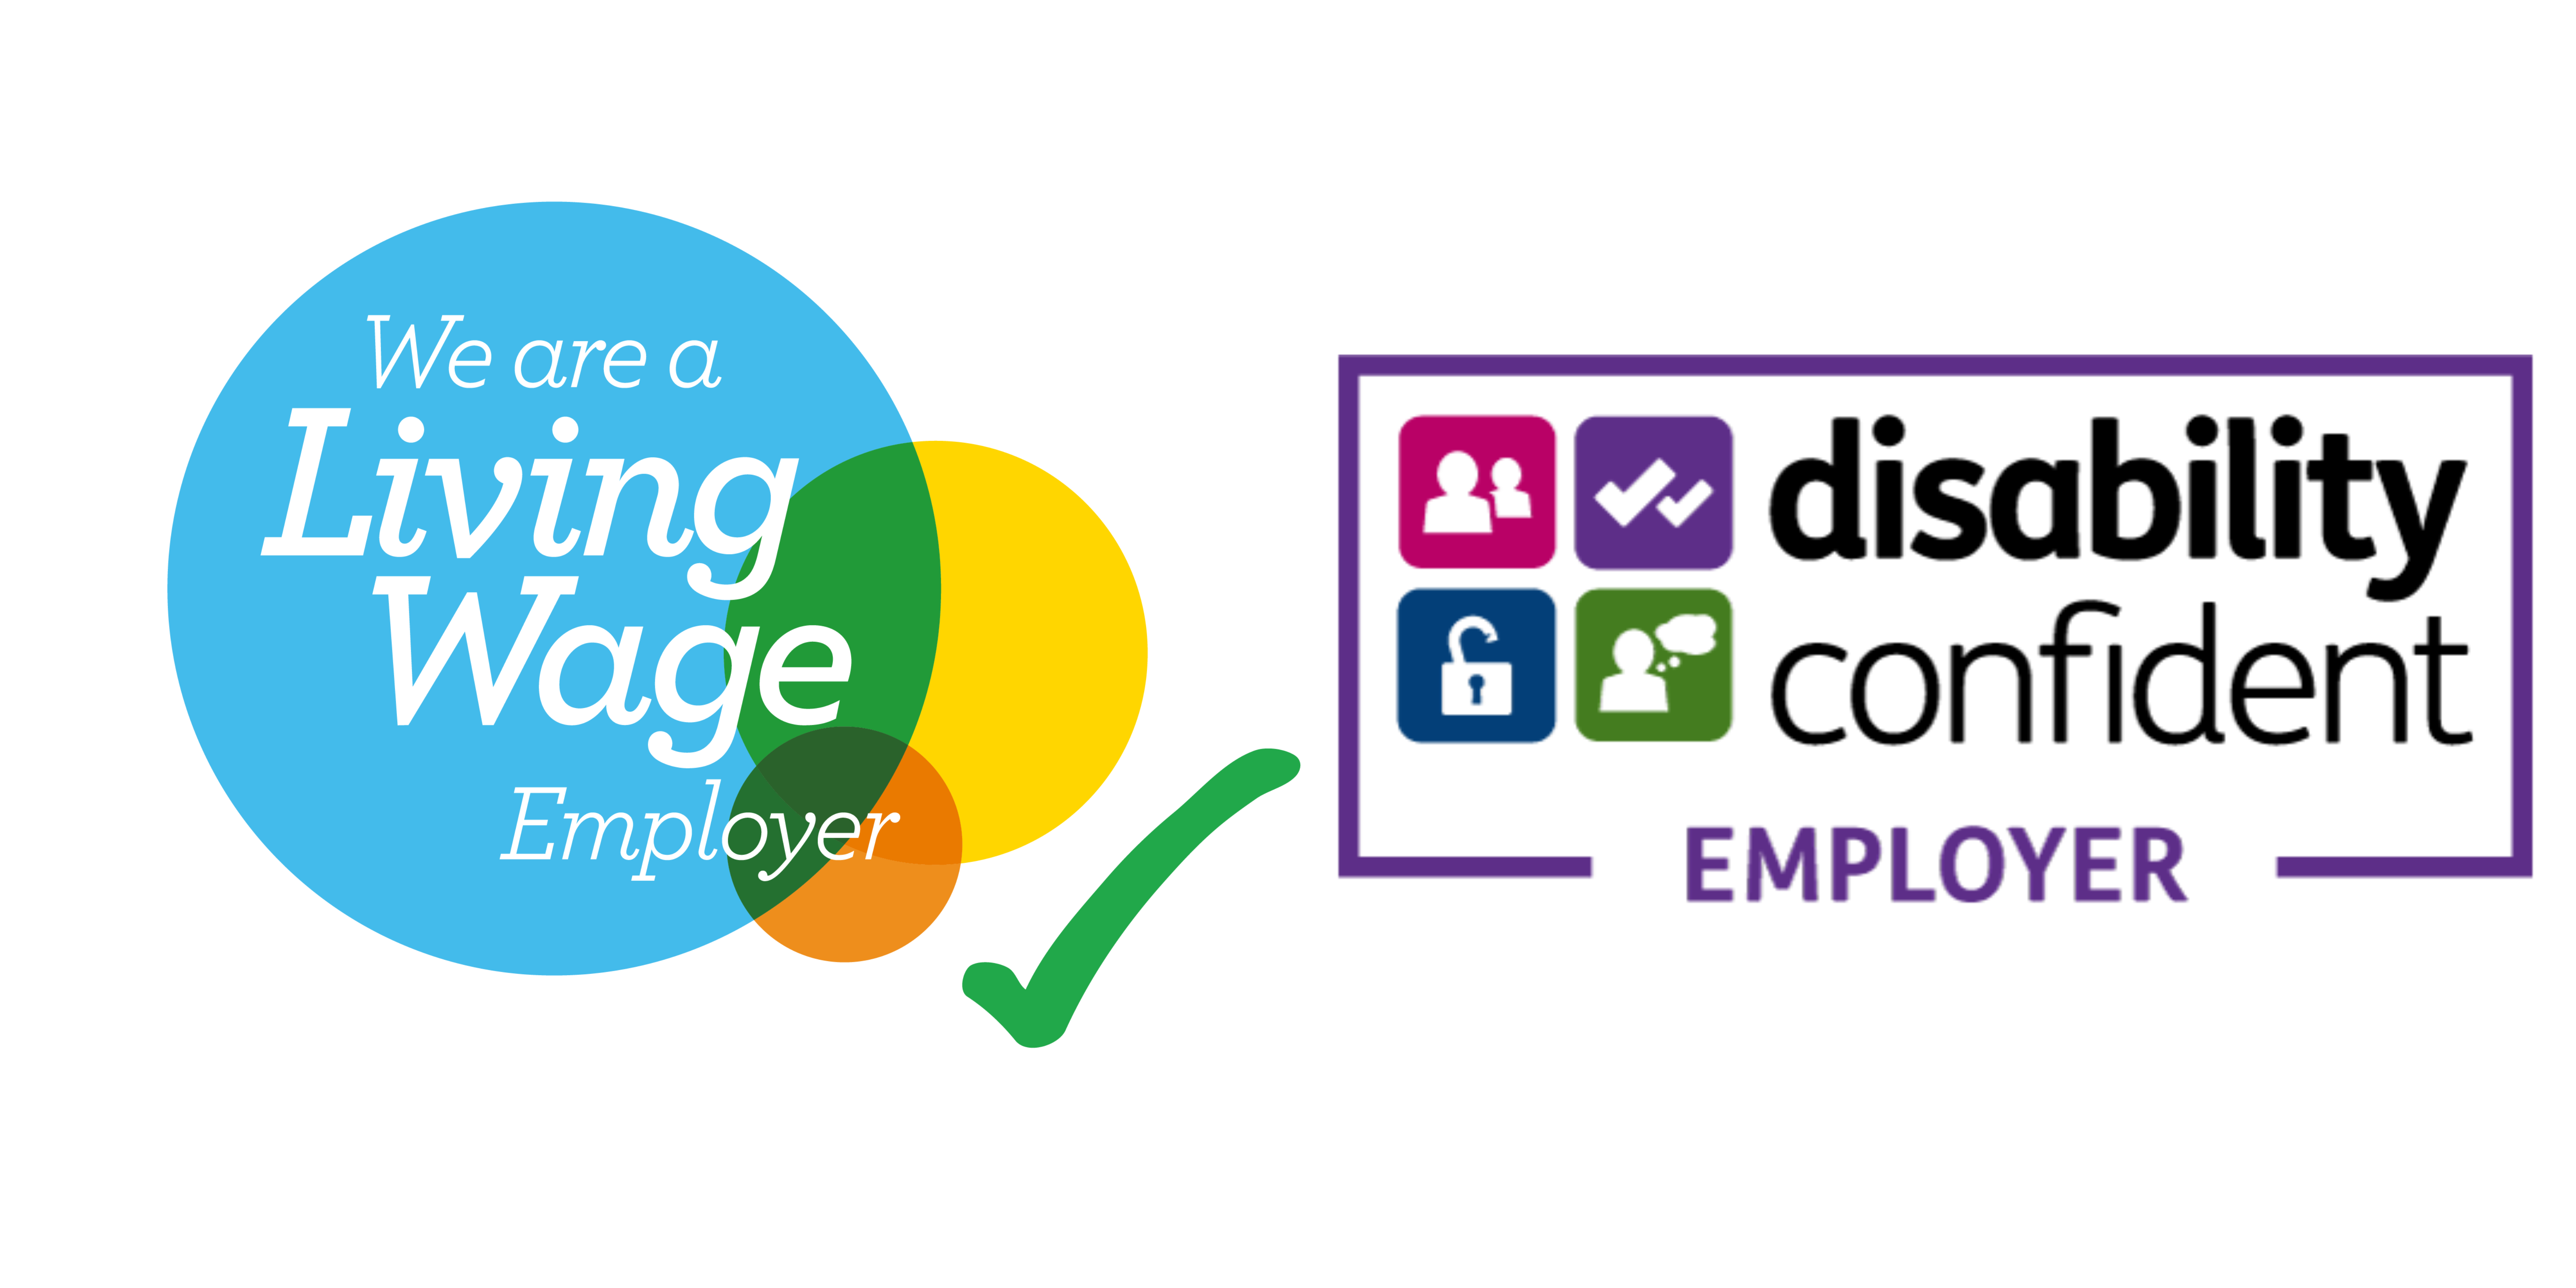 Living wage and disability confident logo